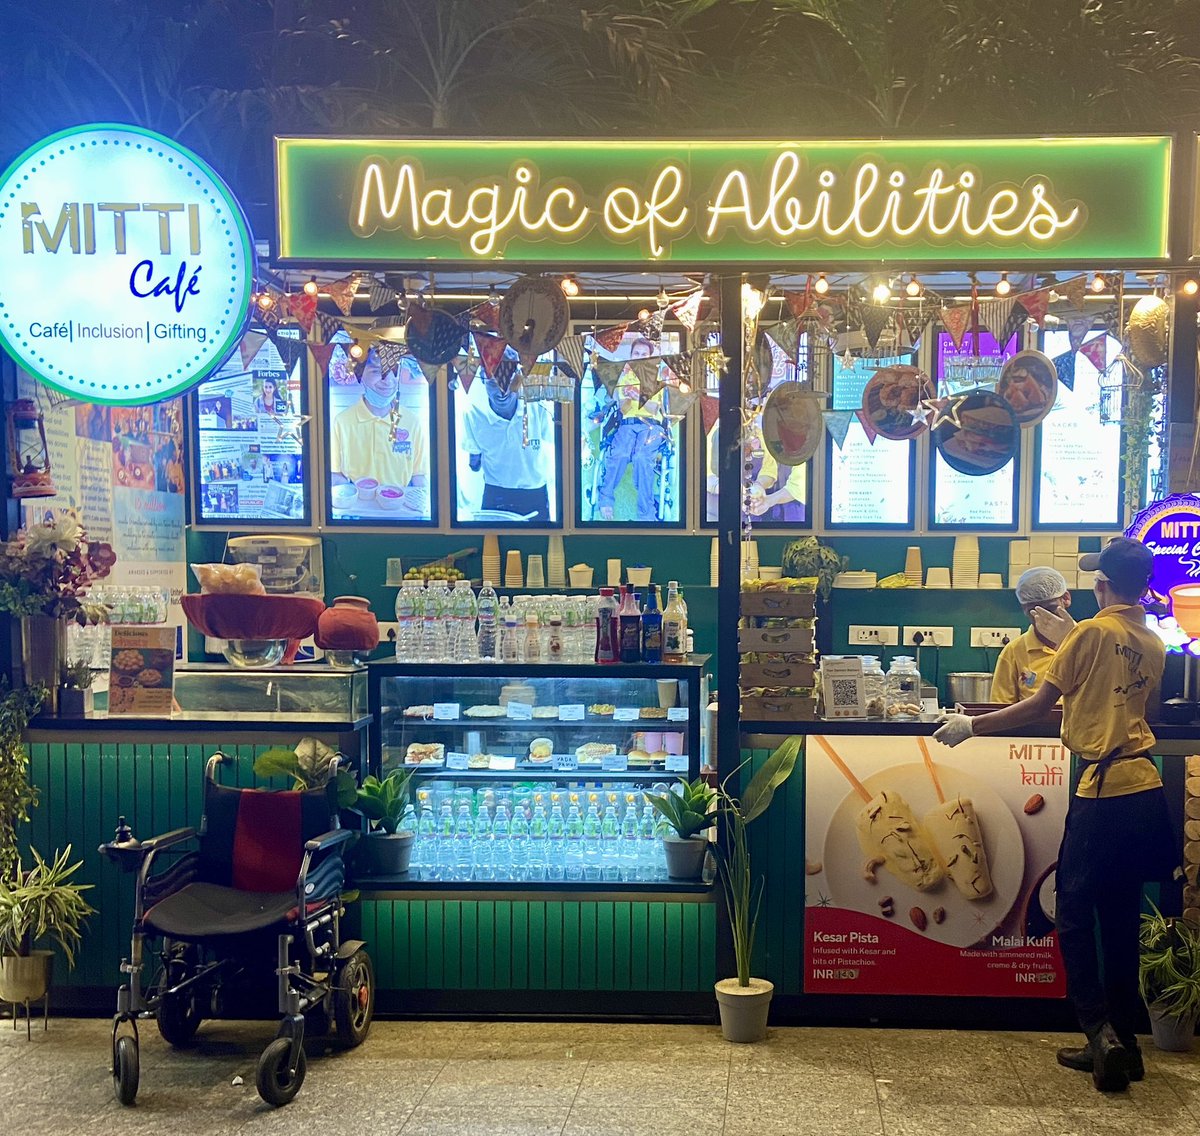 I found a shop at Mumbai airport : Mitti - The Magic of Abilities Here everyone is differently abled. It is amazing to see when differently abled join hands then they can run their own business. I am sure this will inspire many to create more such opportunities.